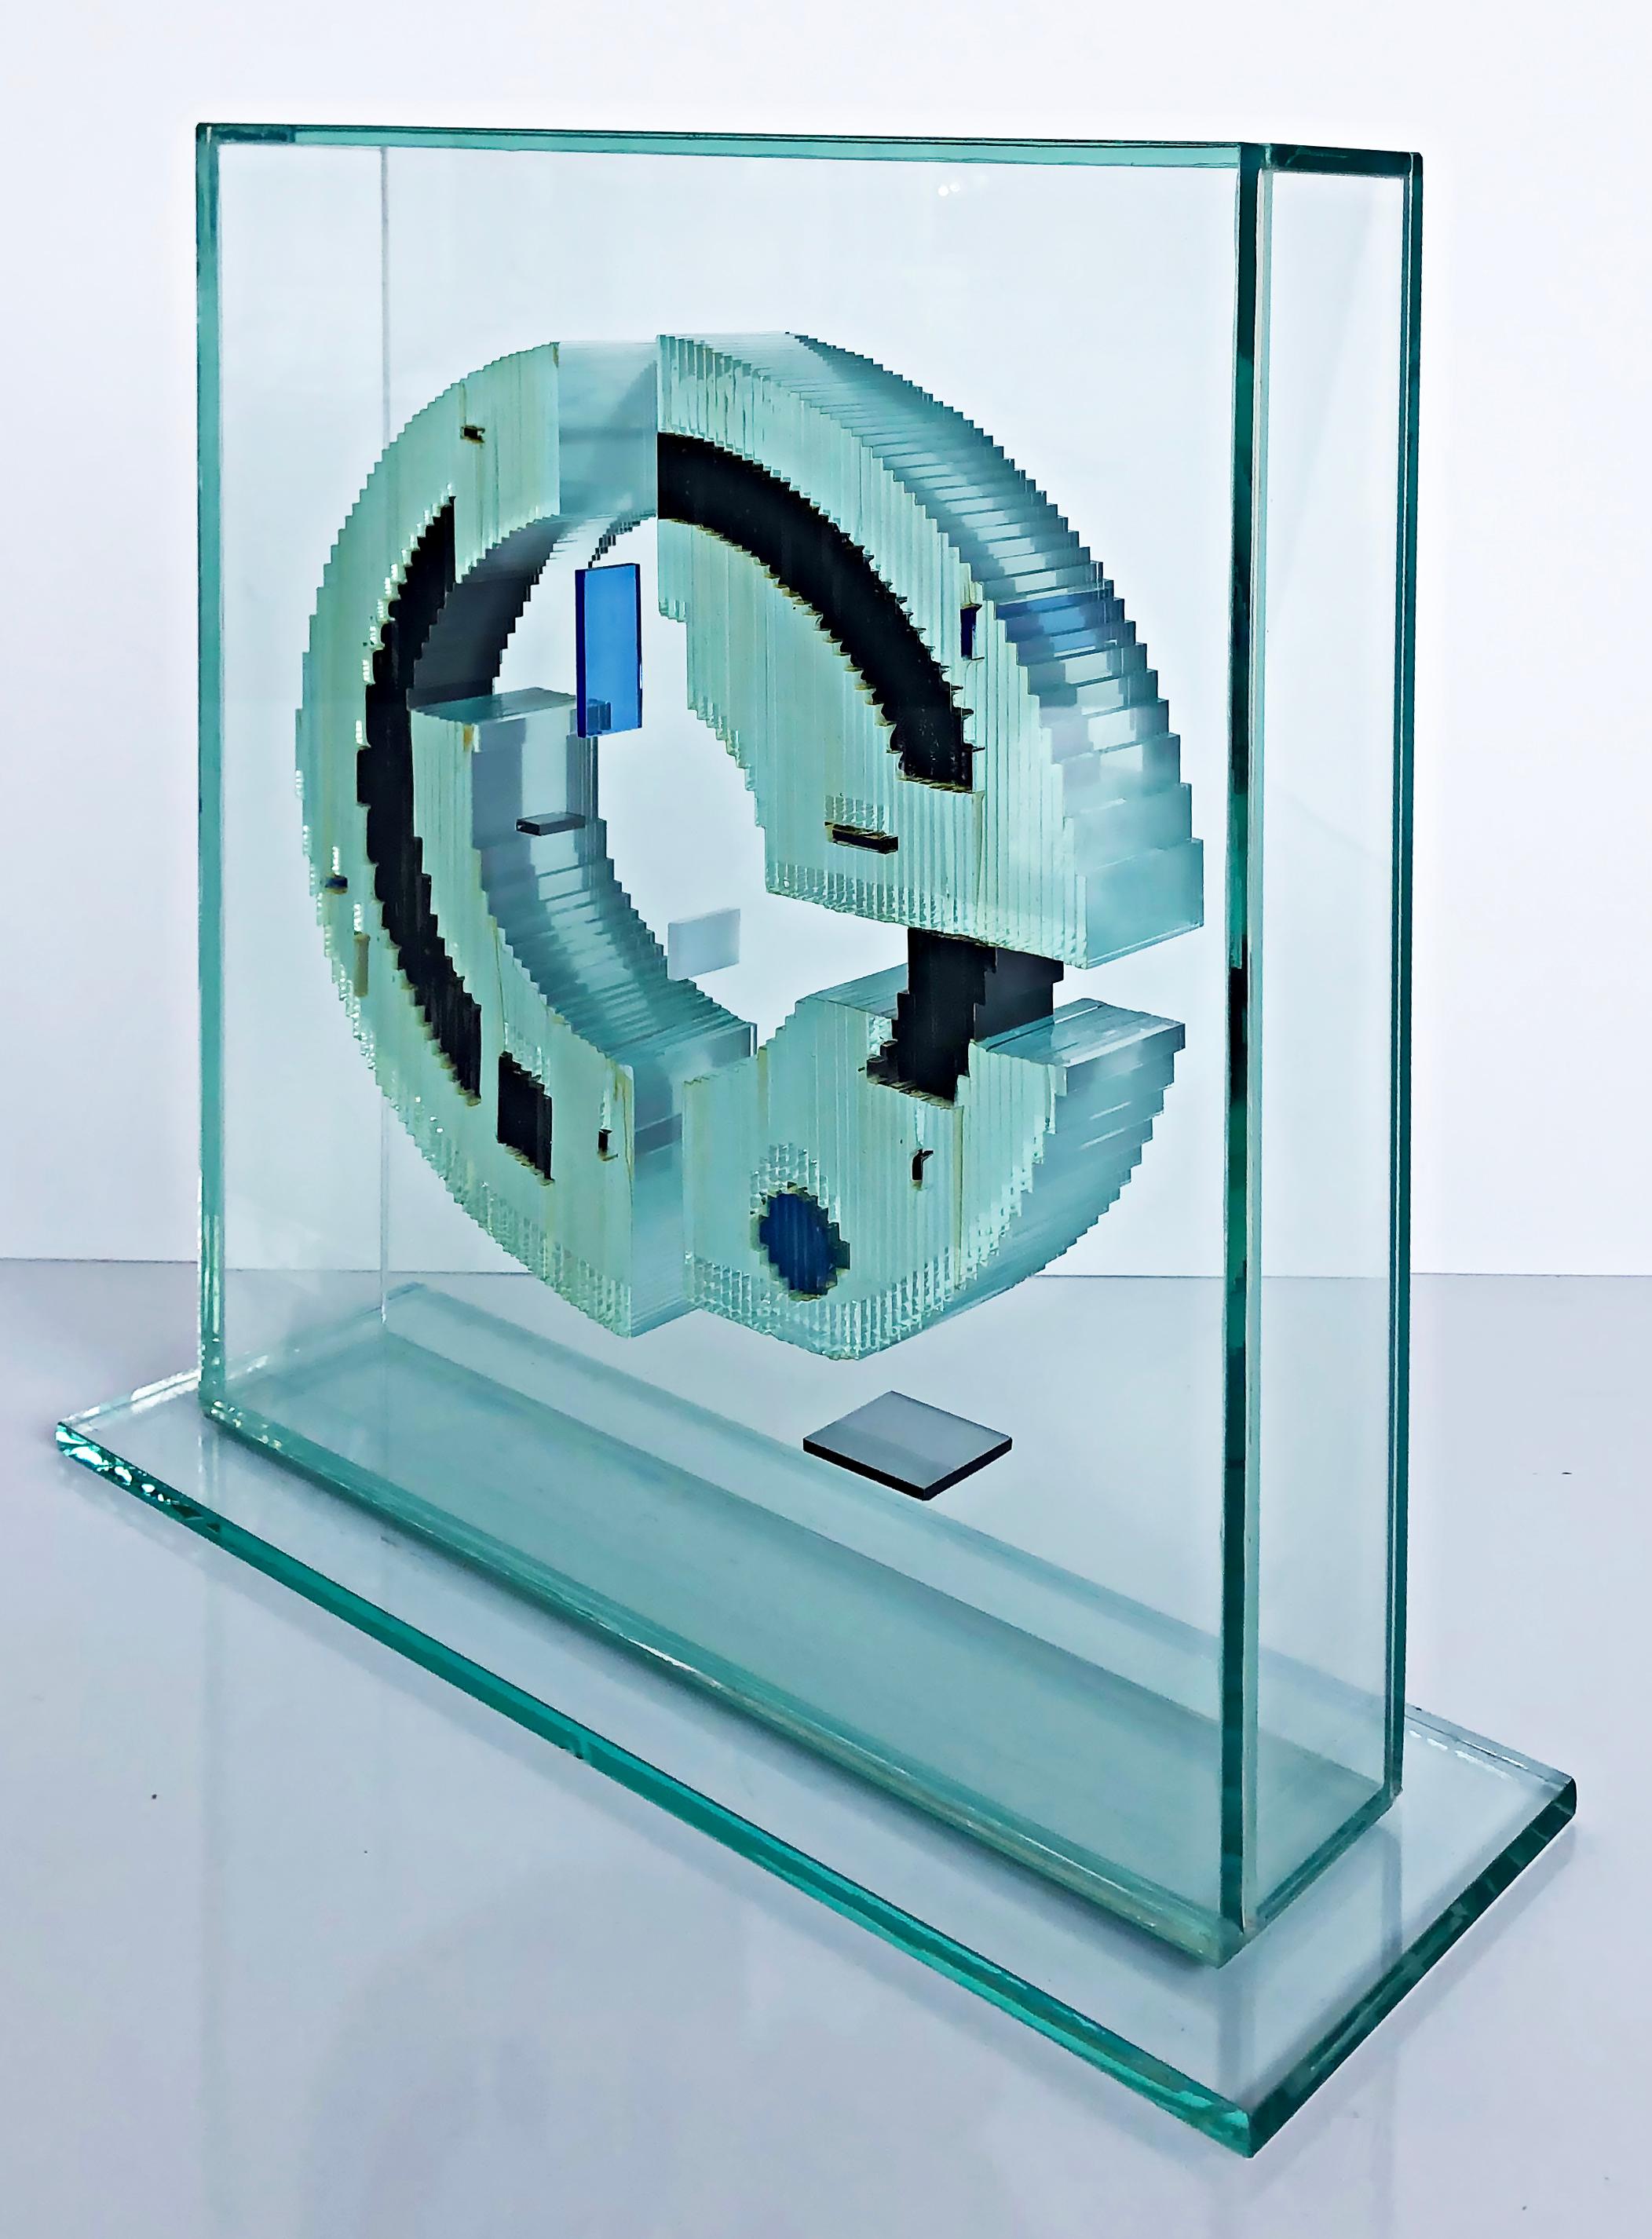 John Seitz abstract encased glass sculpture, signed and dated 1985

Offered for sale is an encased abstract glass sculpture by John Seitz. The piece is mounted on a glass base and is signed and dated 1985. John Seitz's studio is located in Ocala,